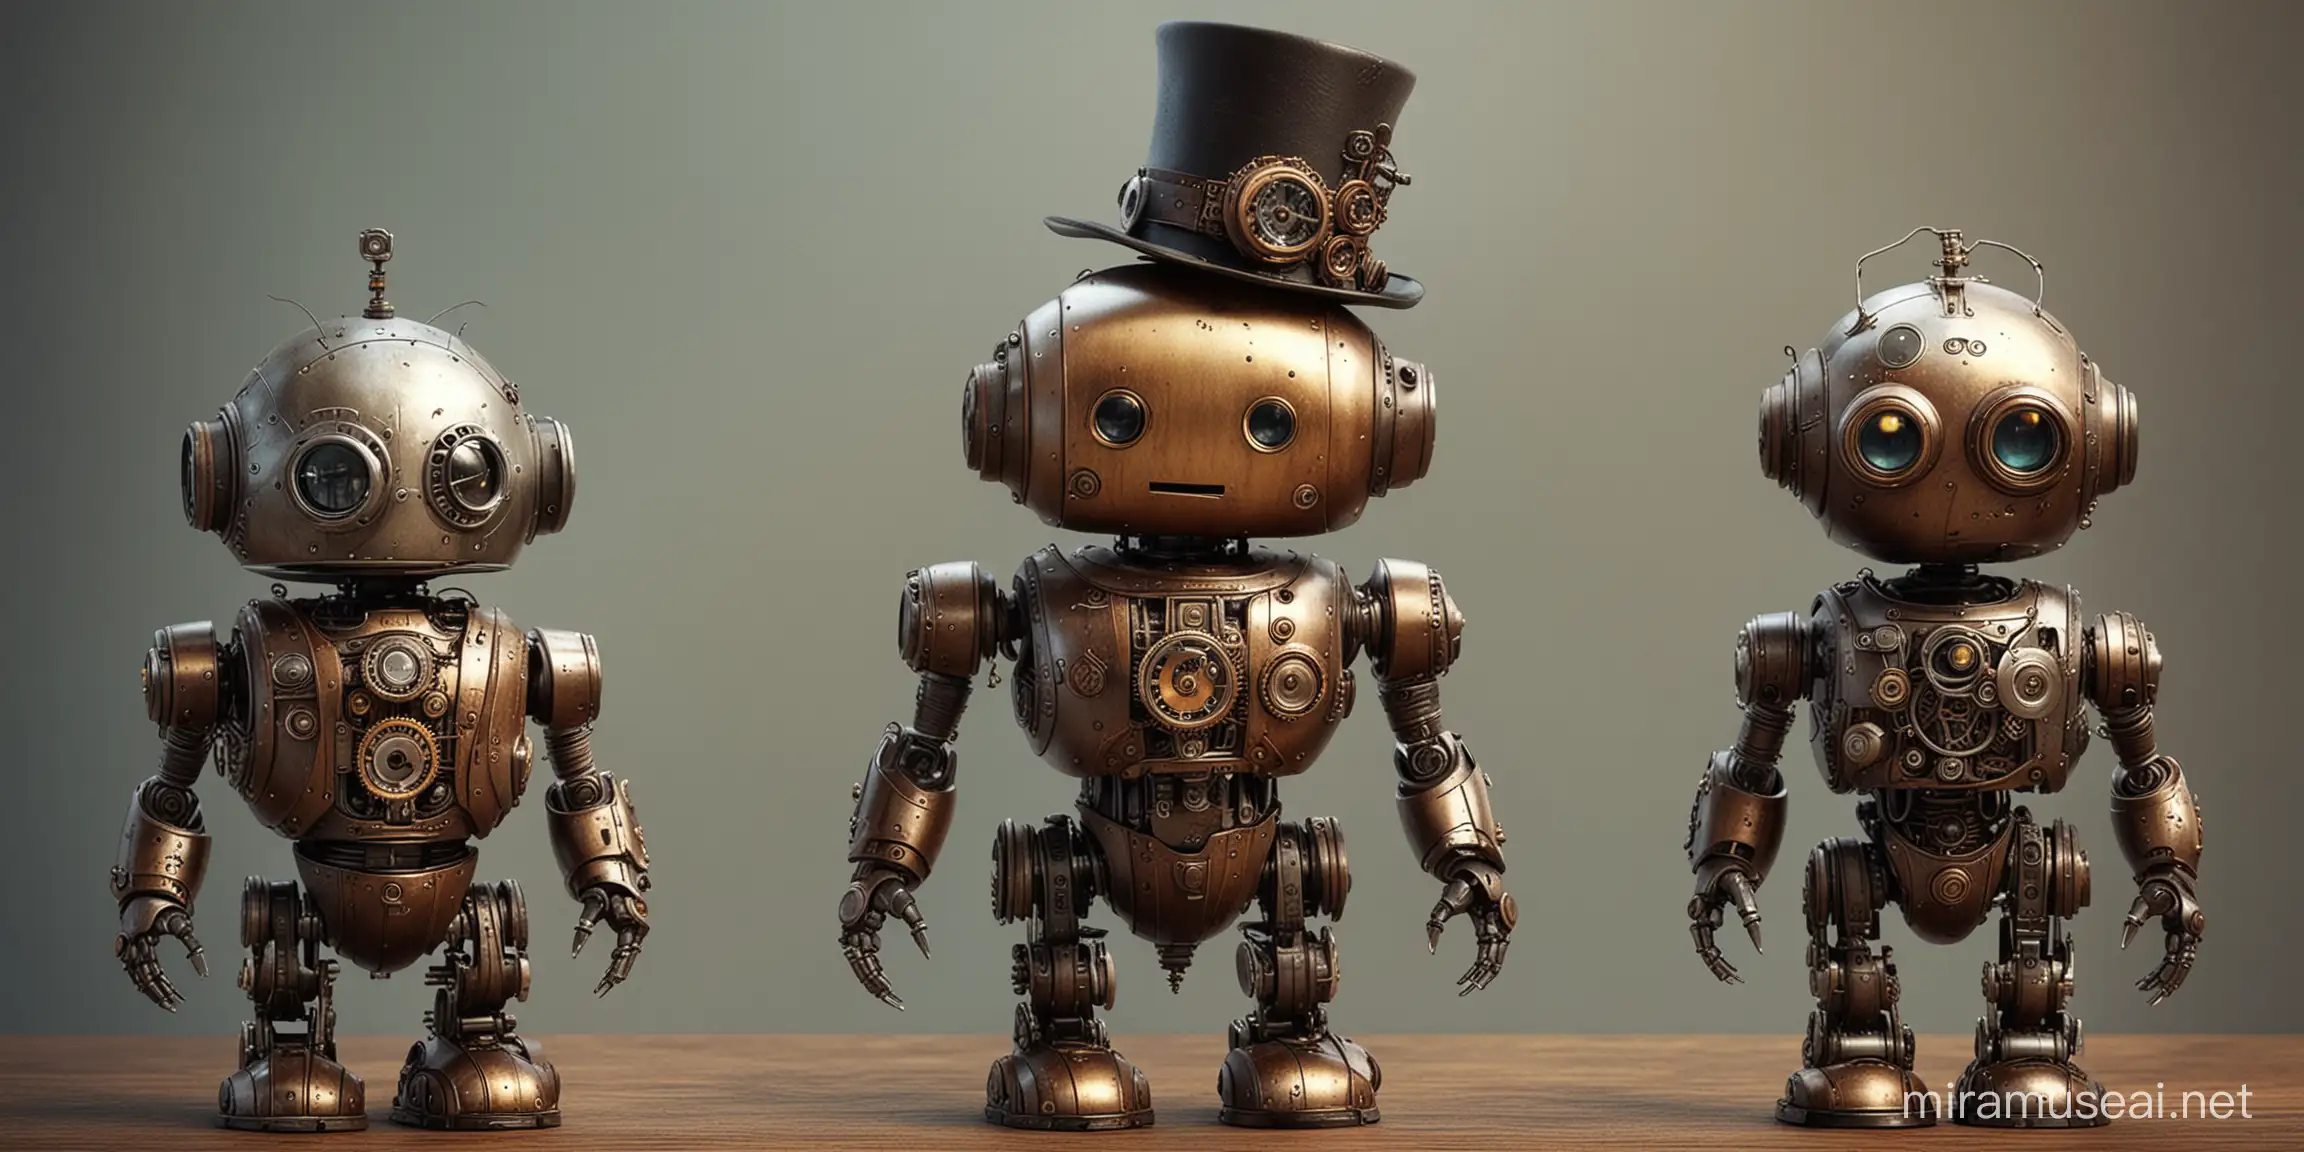 Adorable Steampunk Robot Character with Vintage Charm